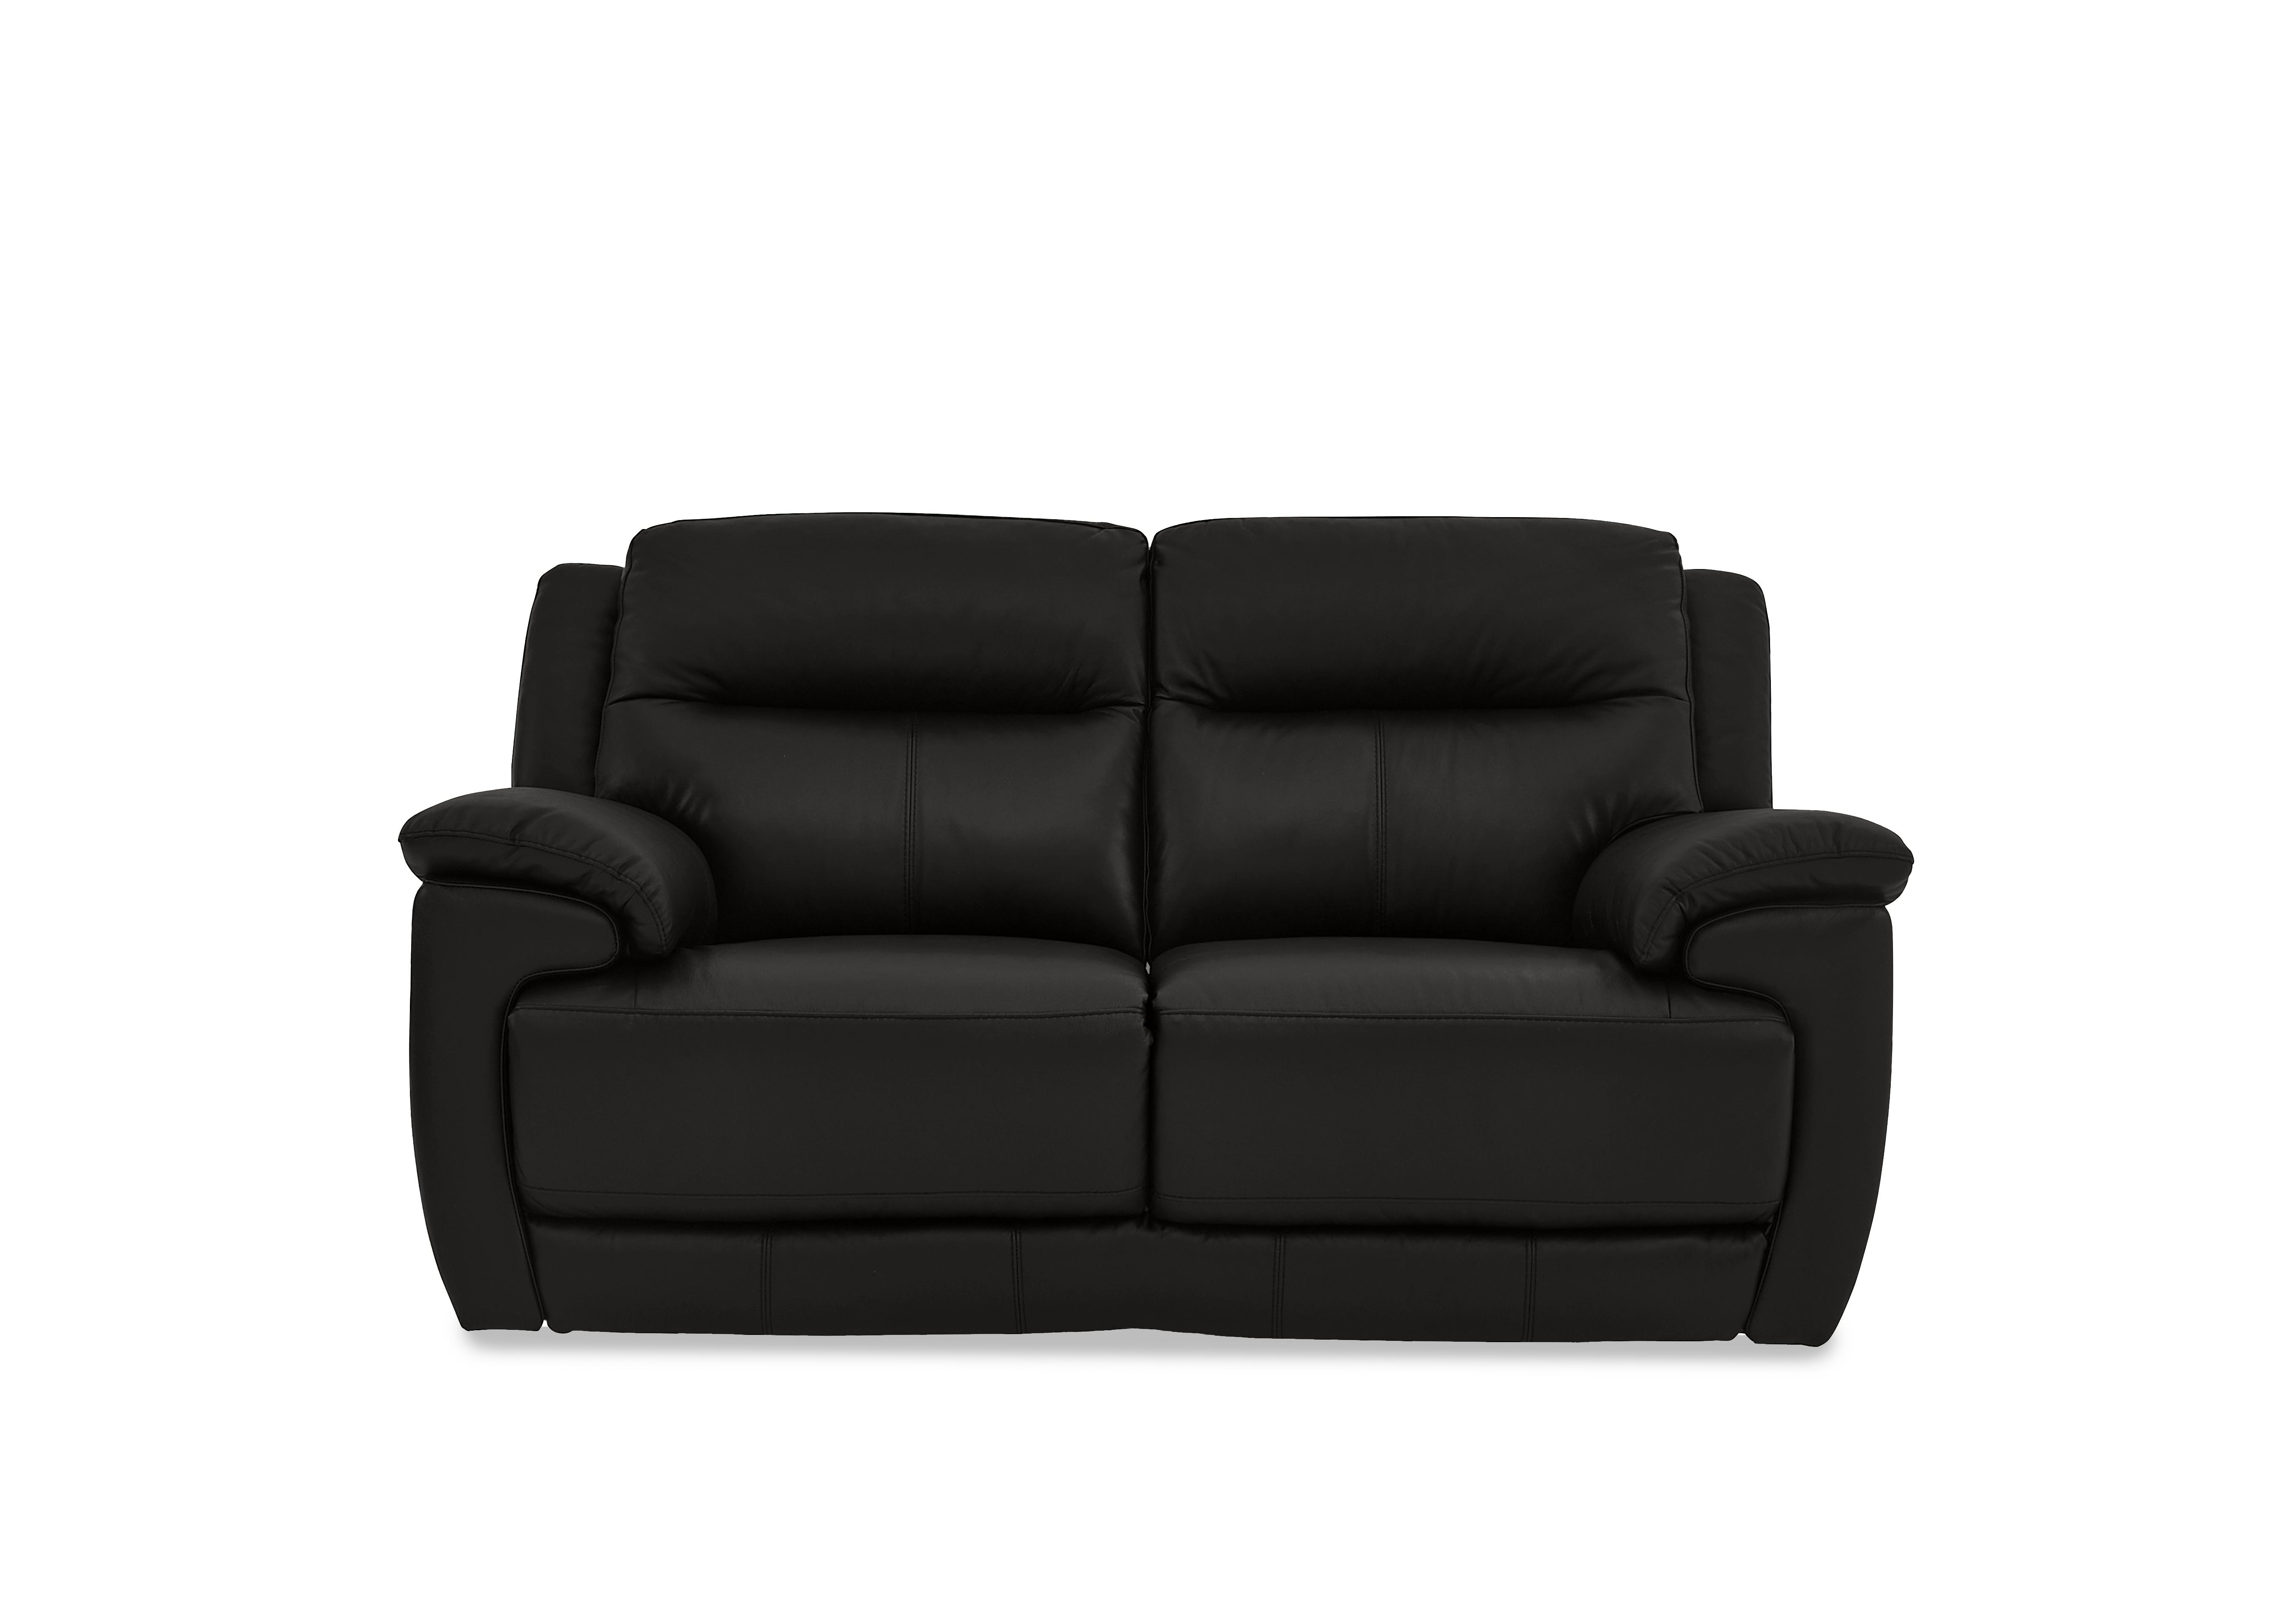 Touch 2 Seater Leather Sofa in Bv-3500 Classic Black on Furniture Village